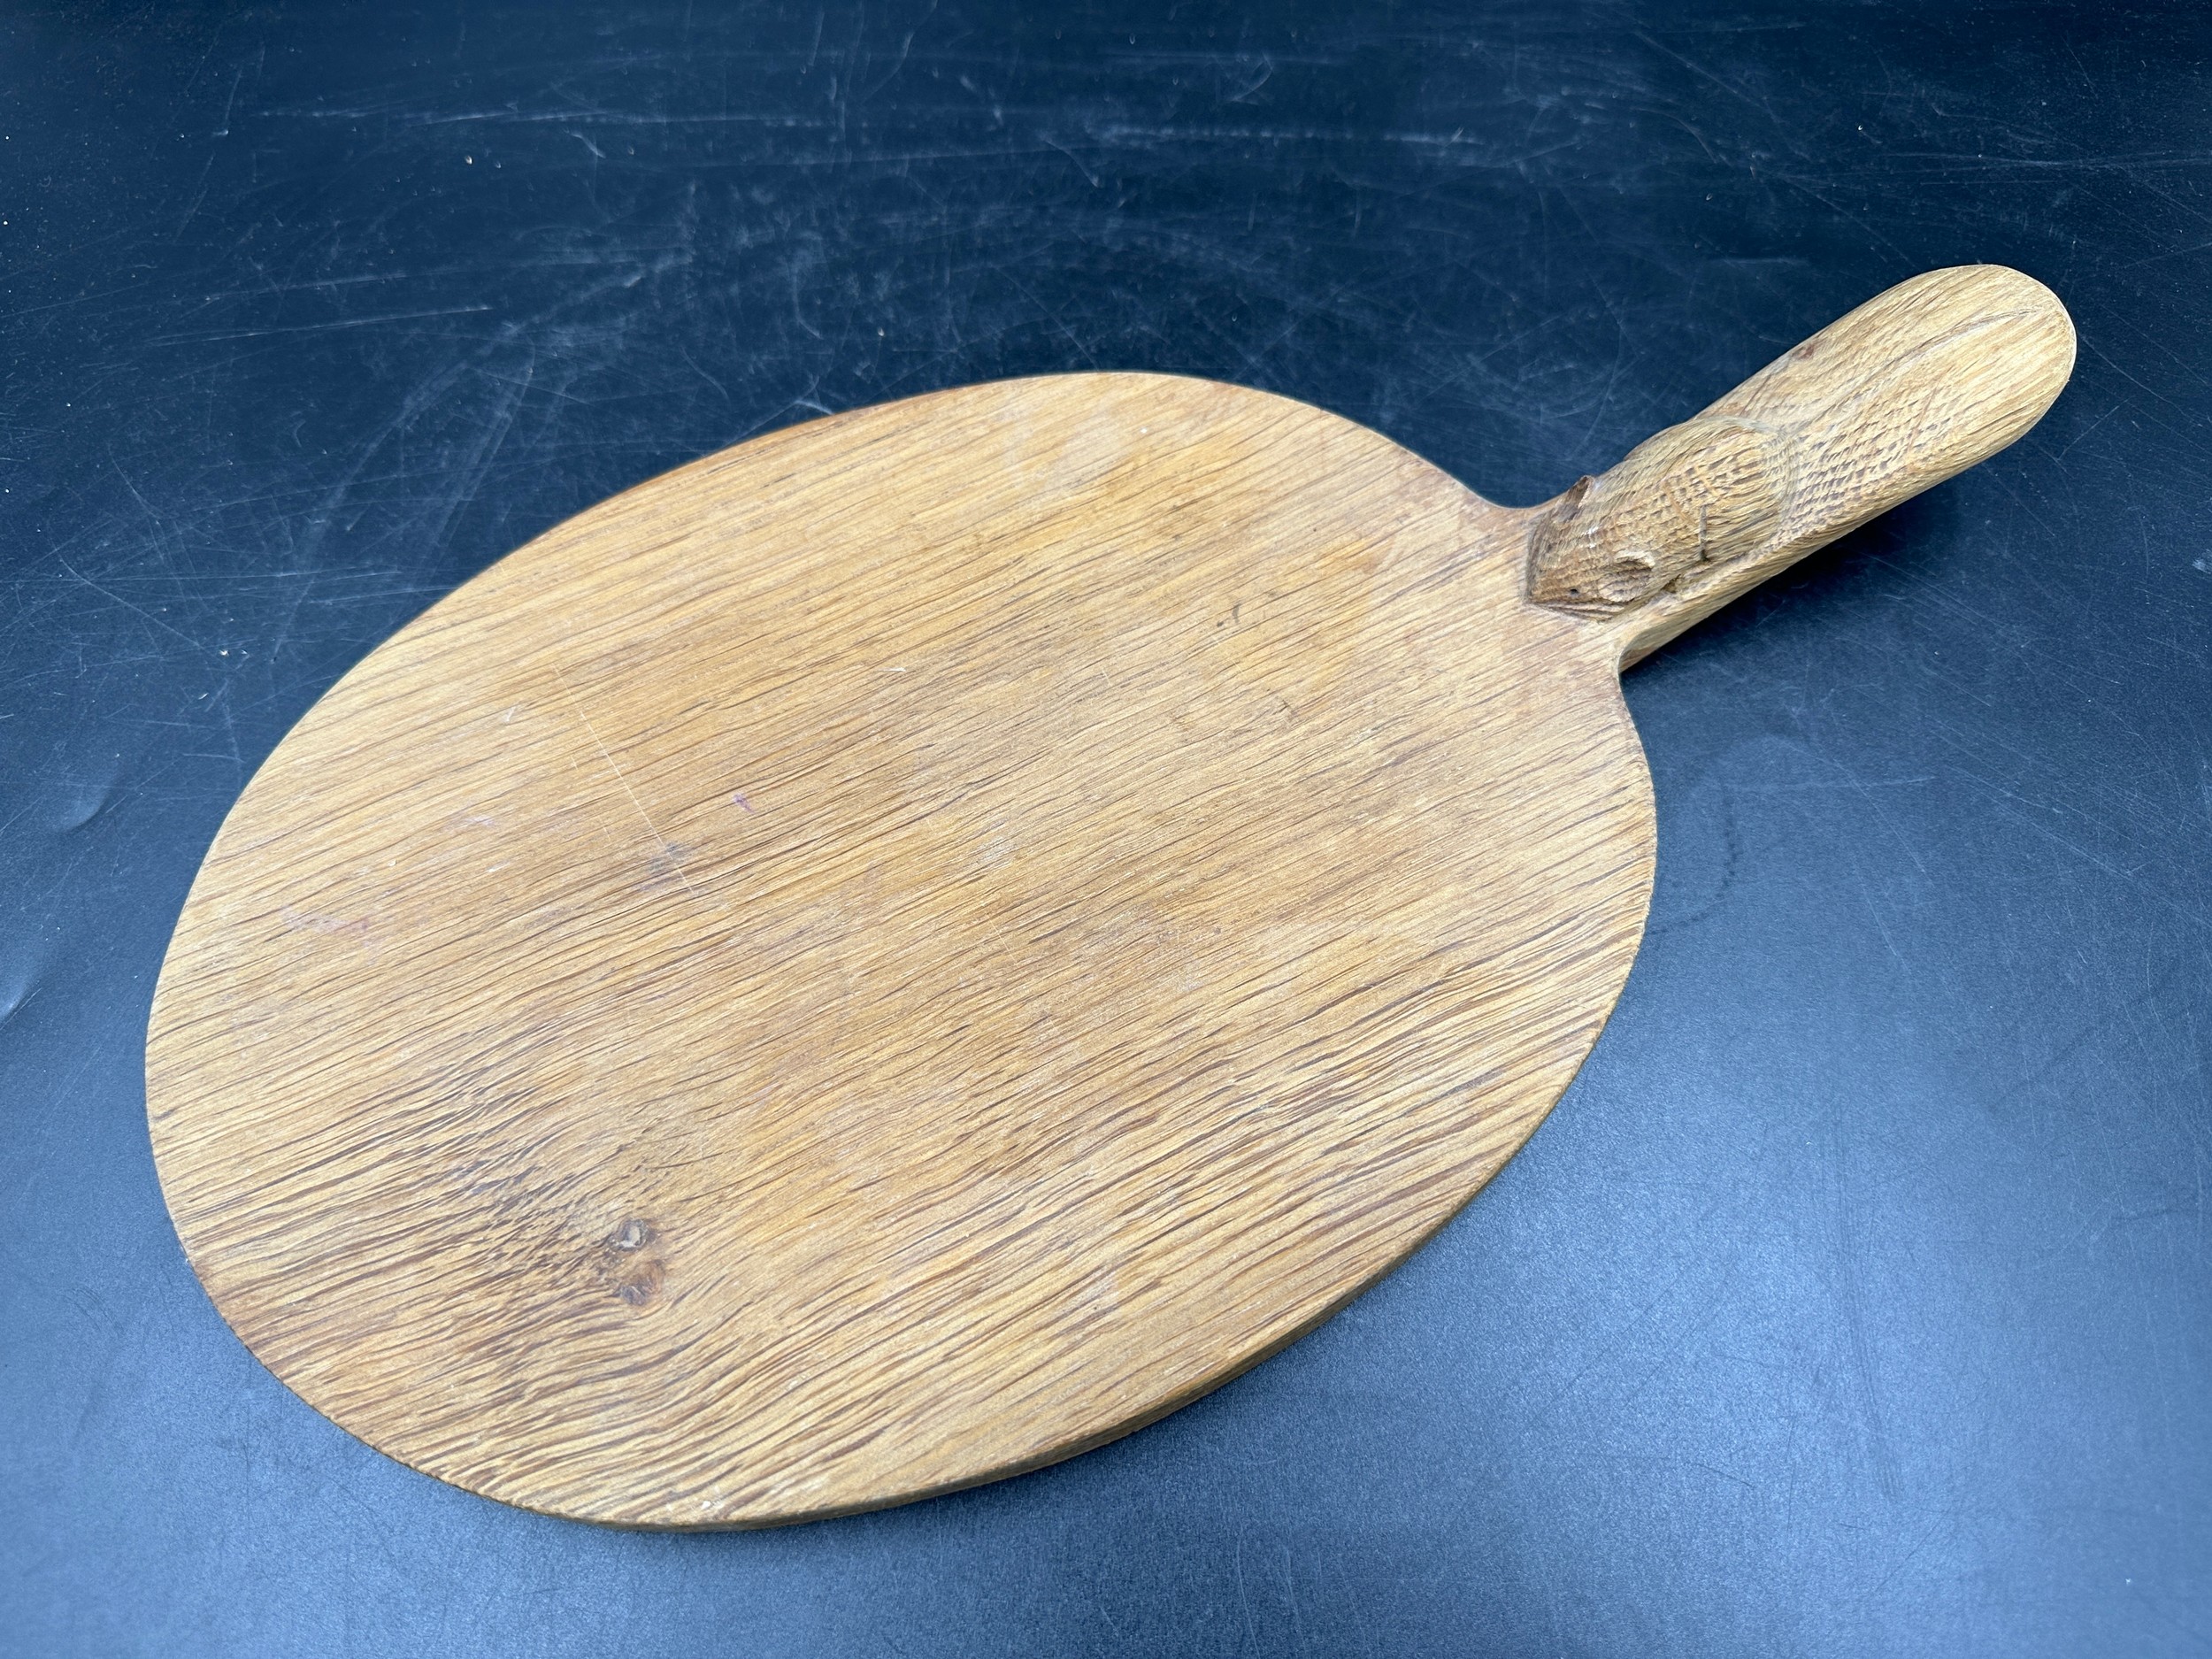 Robert Thompson 'Mouseman' of Kilburn, an adzed oak cheese board of oval form with a carved mouse - Image 2 of 5